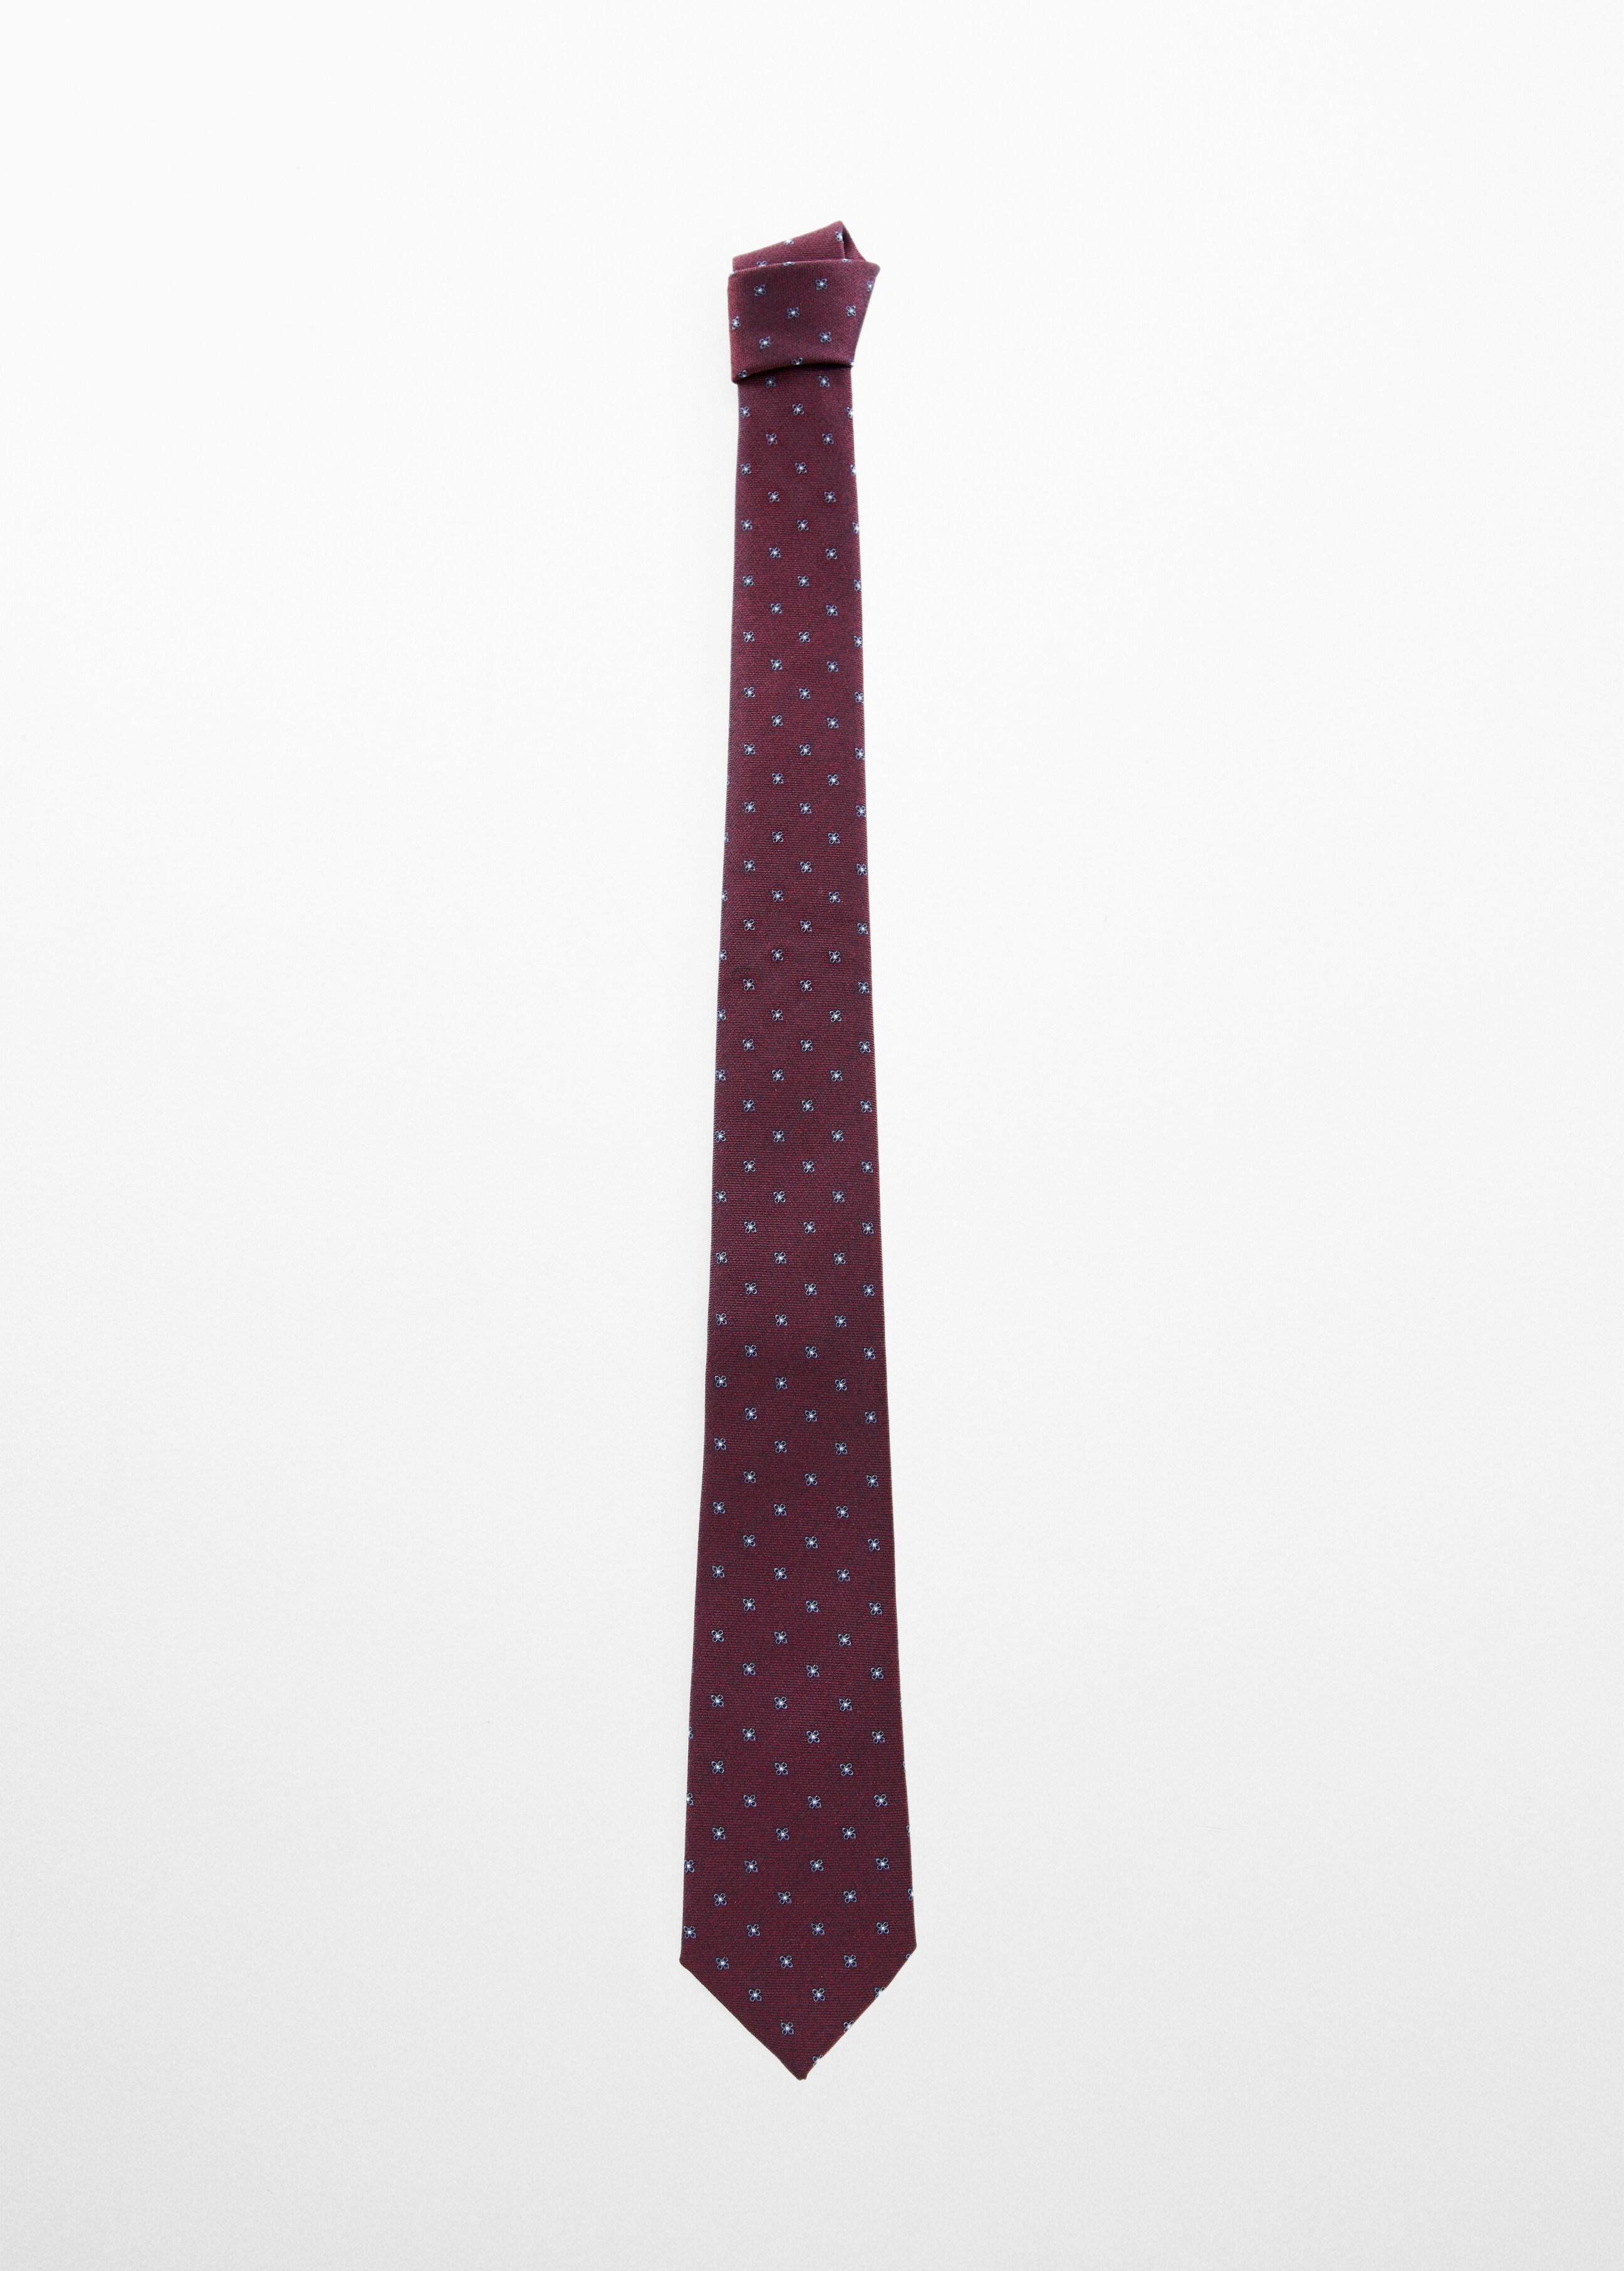 Crease-resistant patterned tie - Article without model